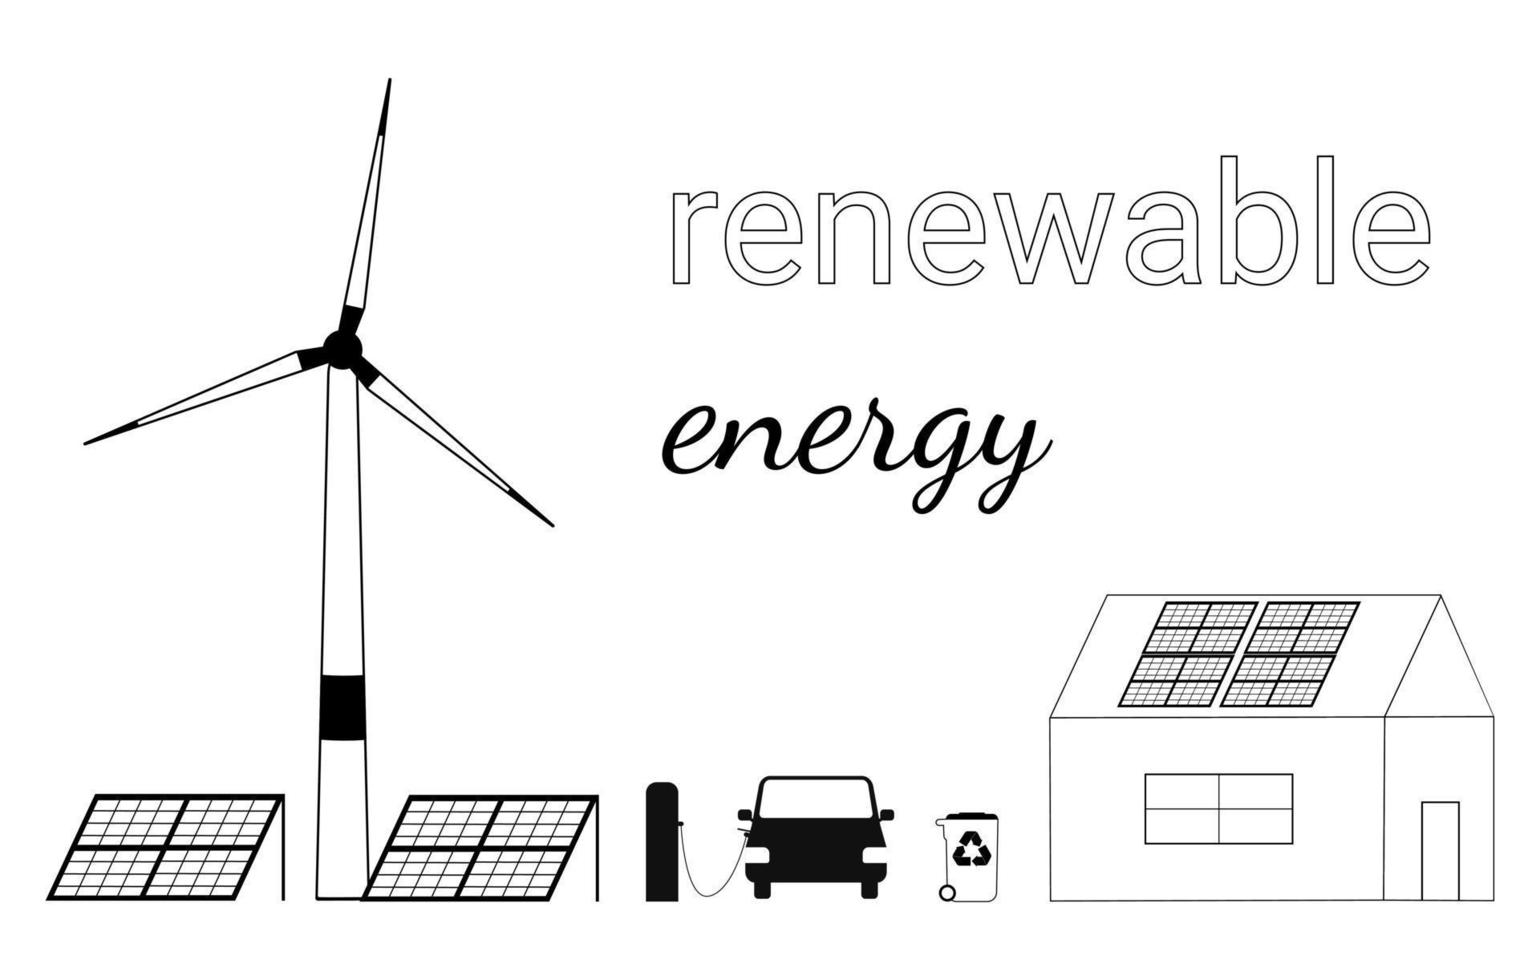 Hand drawn set of illustrations showing how to use renewable energy sources. windmill, solar panels and a battery-powered car. Doodle sketch. Vector illustration